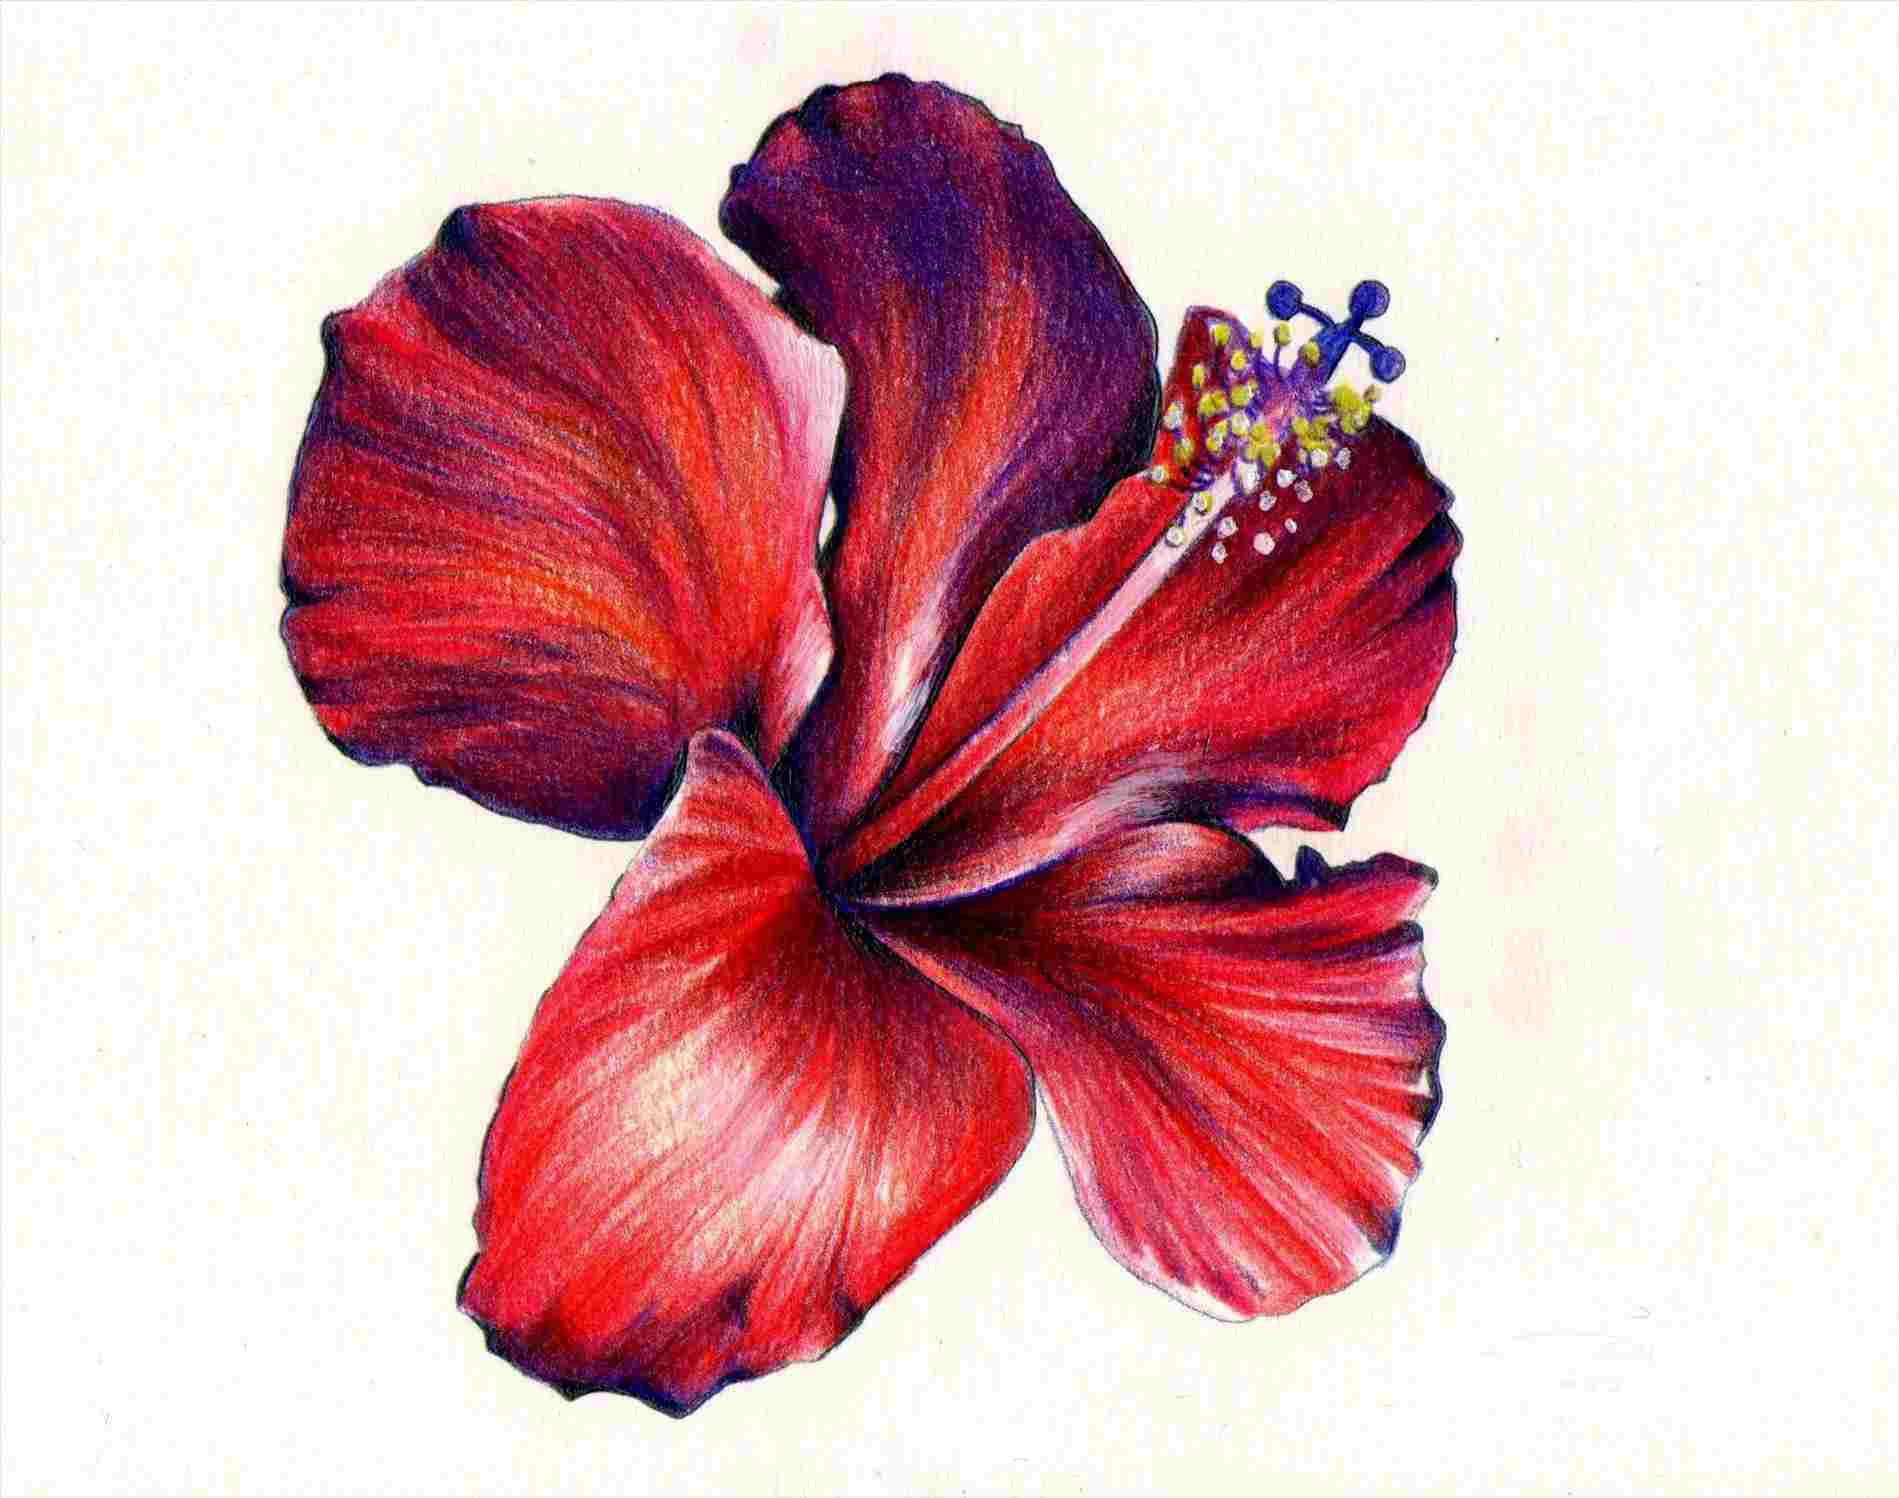 Colour Drawing Pictures Of Flowers at PaintingValley.com | Explore